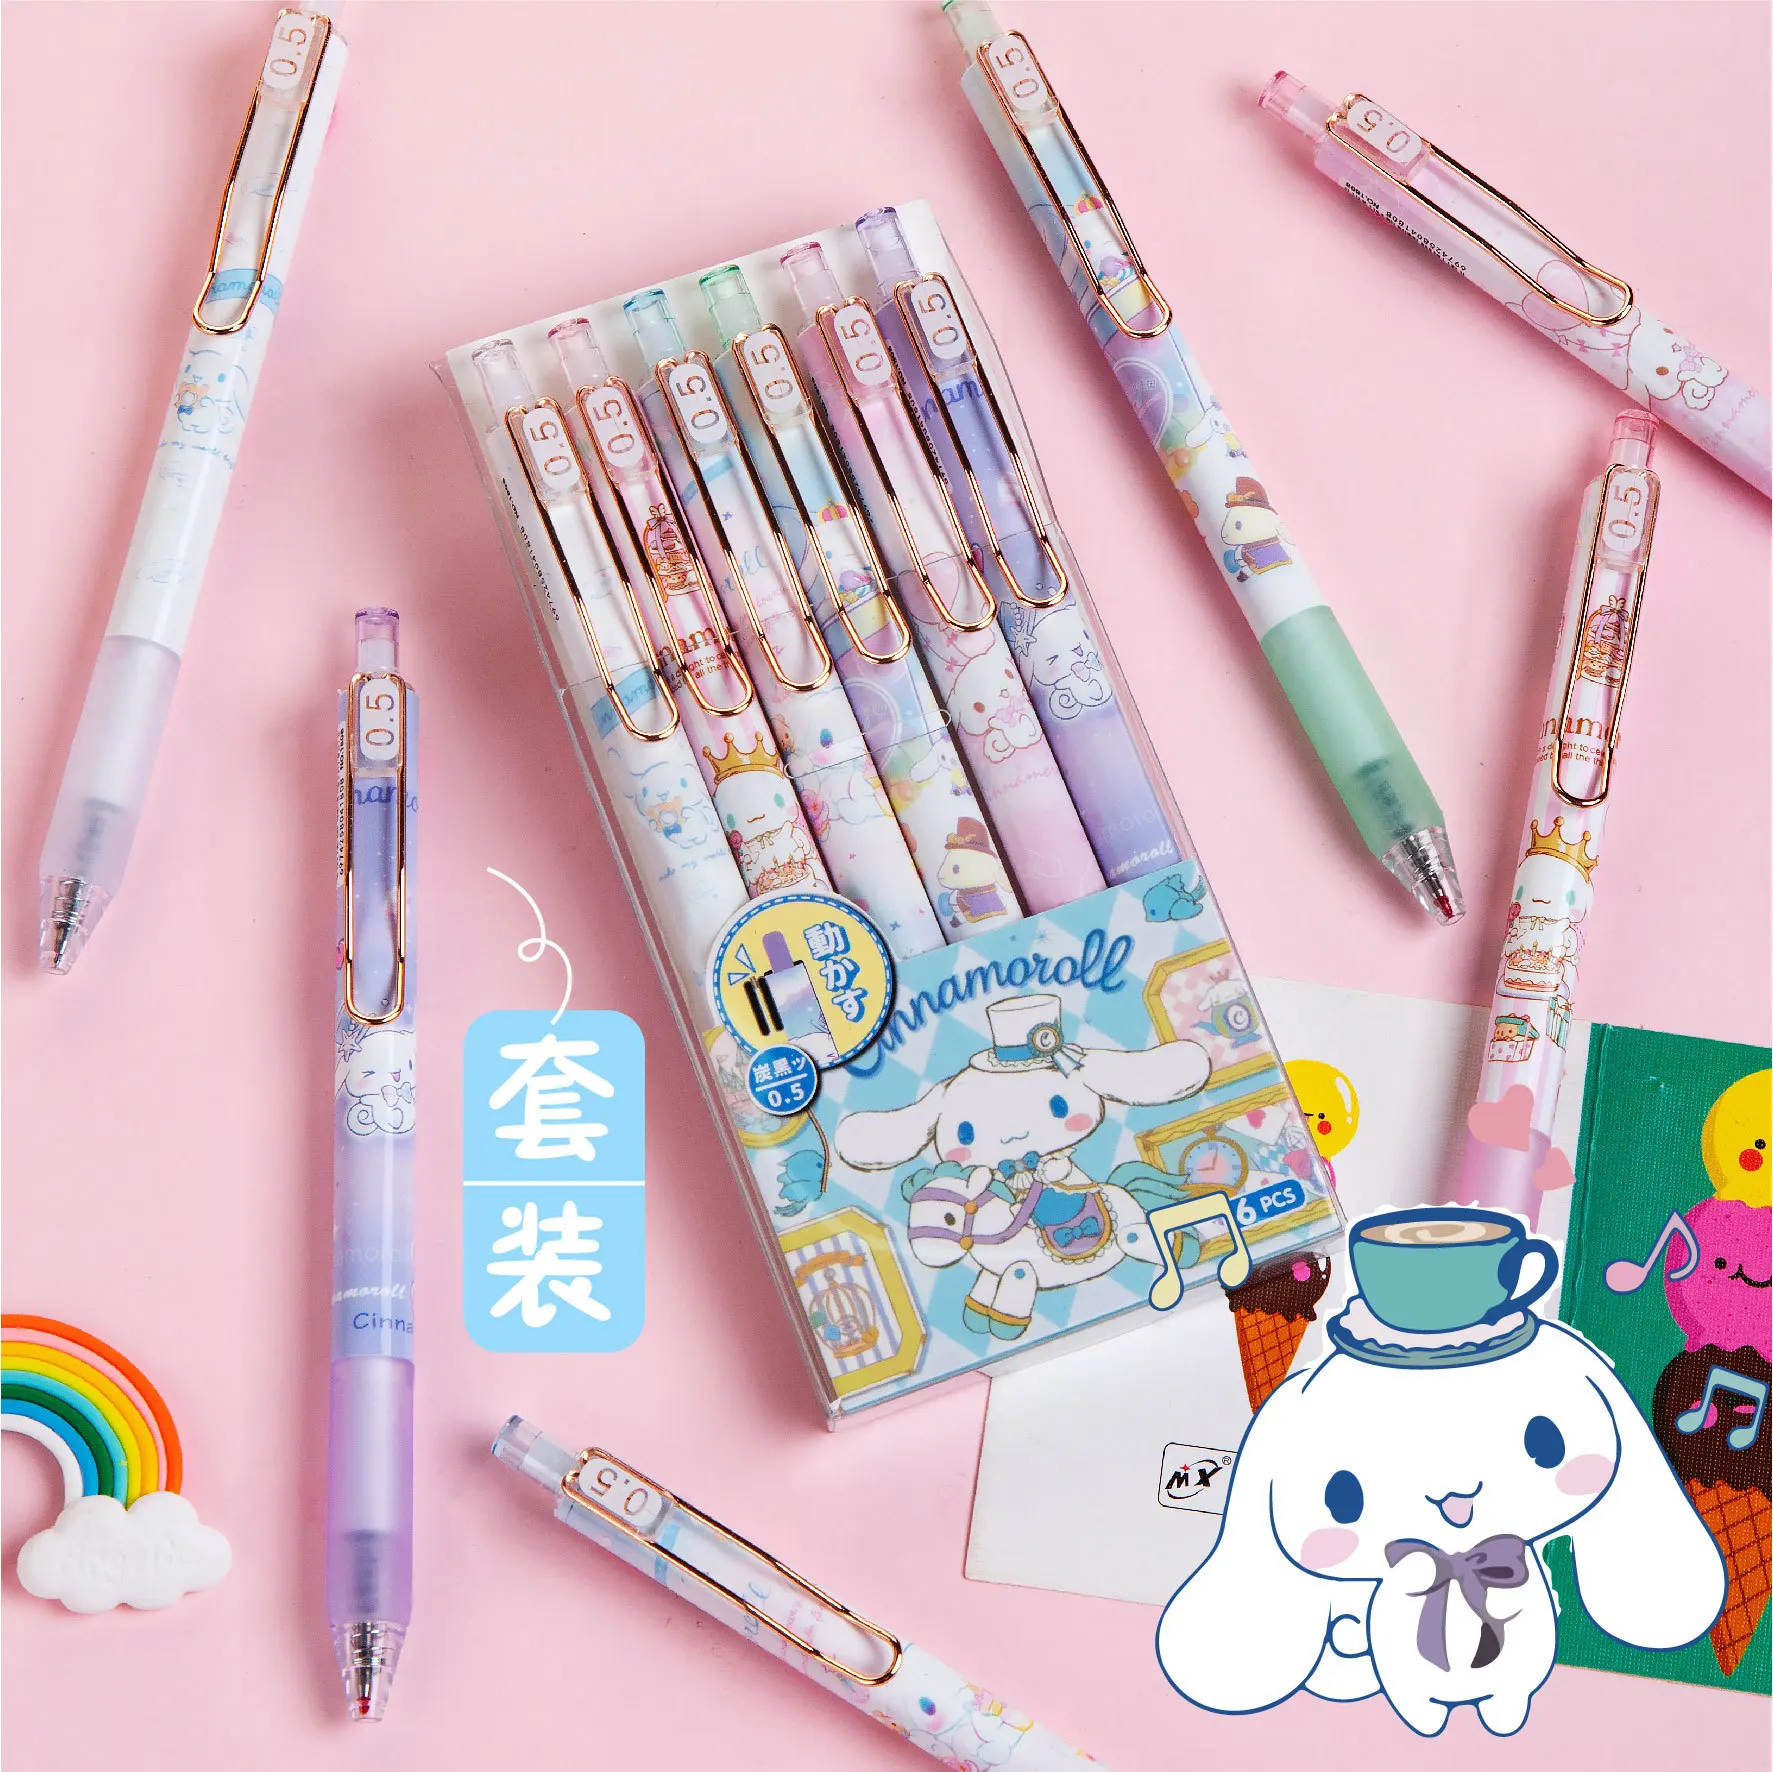 6Pcs Sanrio Neutral Pen Kawaii Cinnamoroll 0.5Mm Ins Press Pen Student Writing School Supplies Anime Press Gel Pen Stationery fine anime death note notebook school large anime theme writing leather journal collectable death note notebook